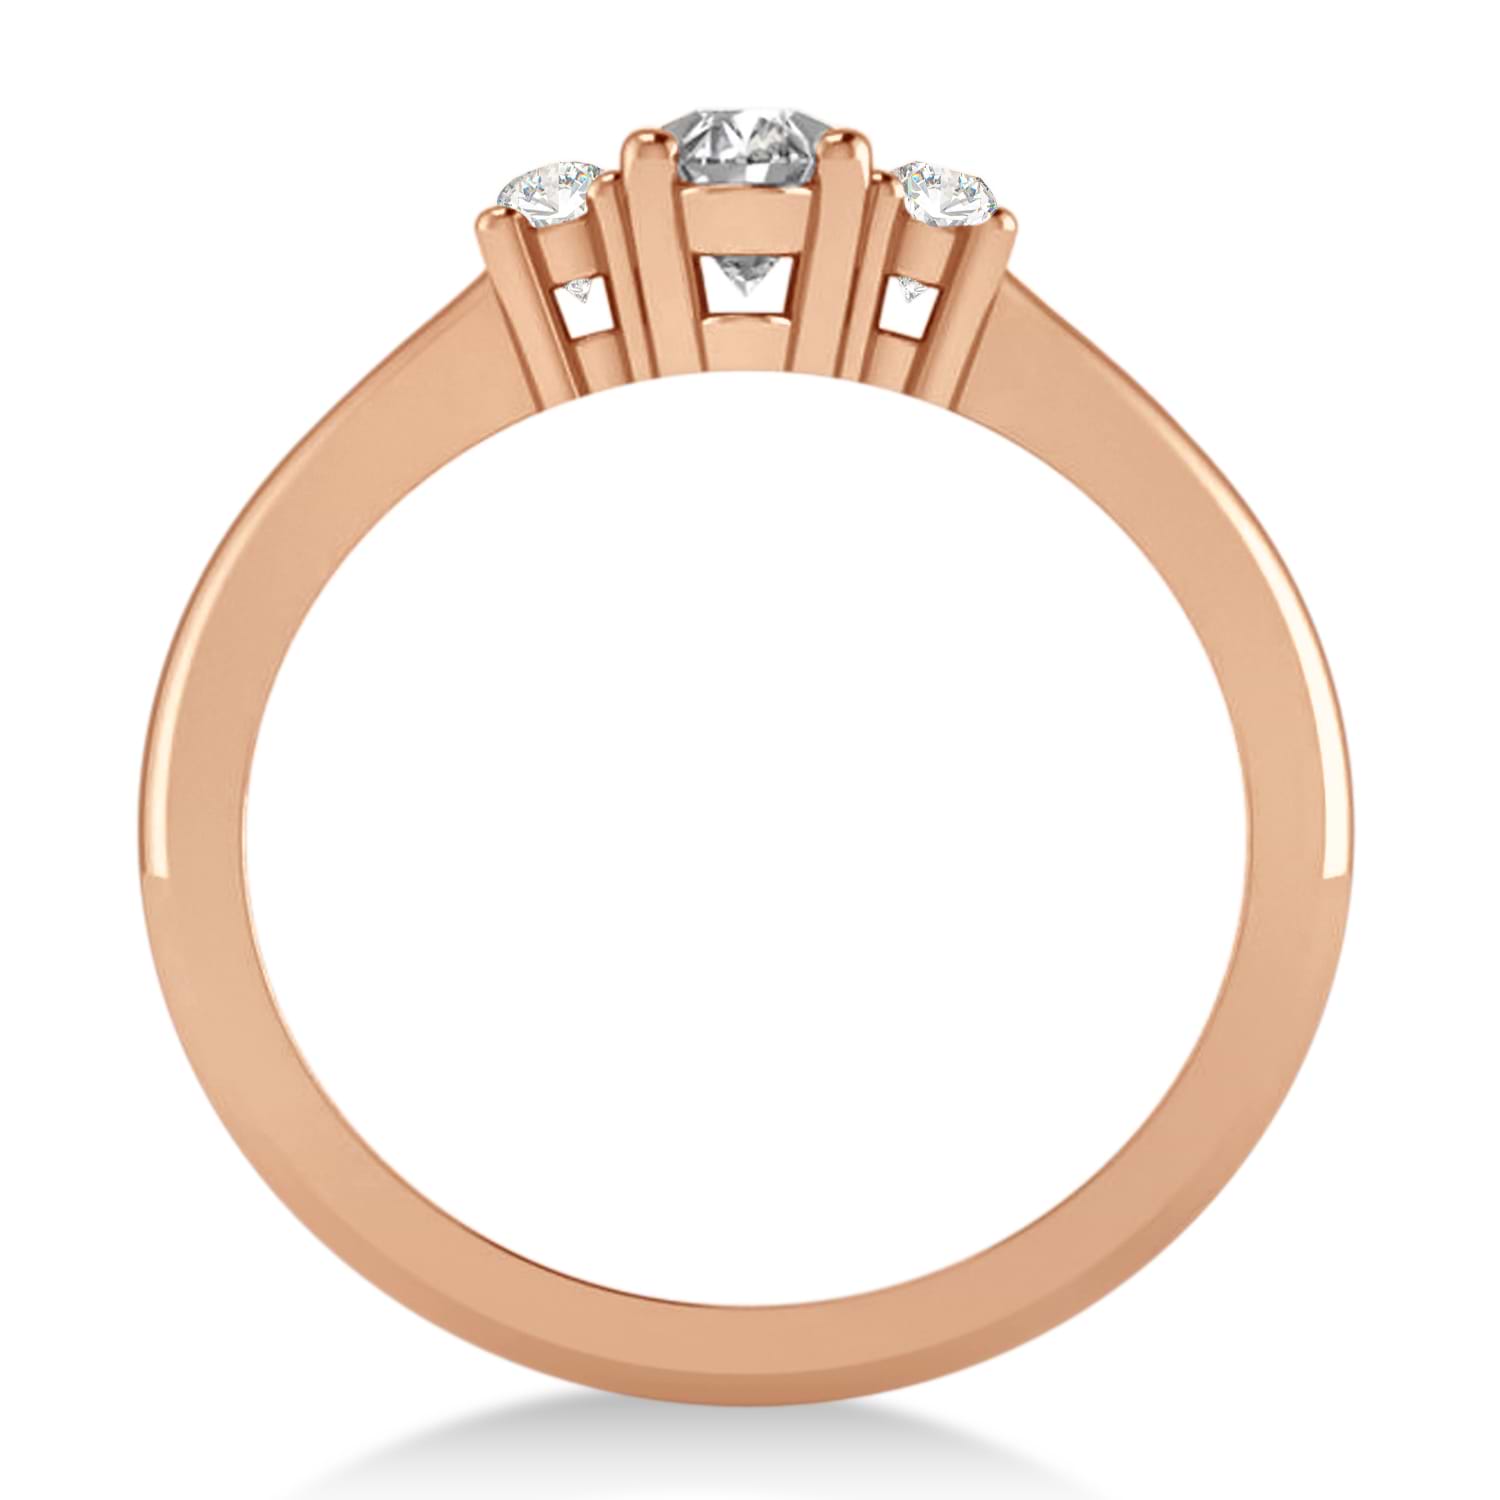 Small Oval Diamond Three-Stone Engagement Ring 14k Rose Gold (0.60ct)